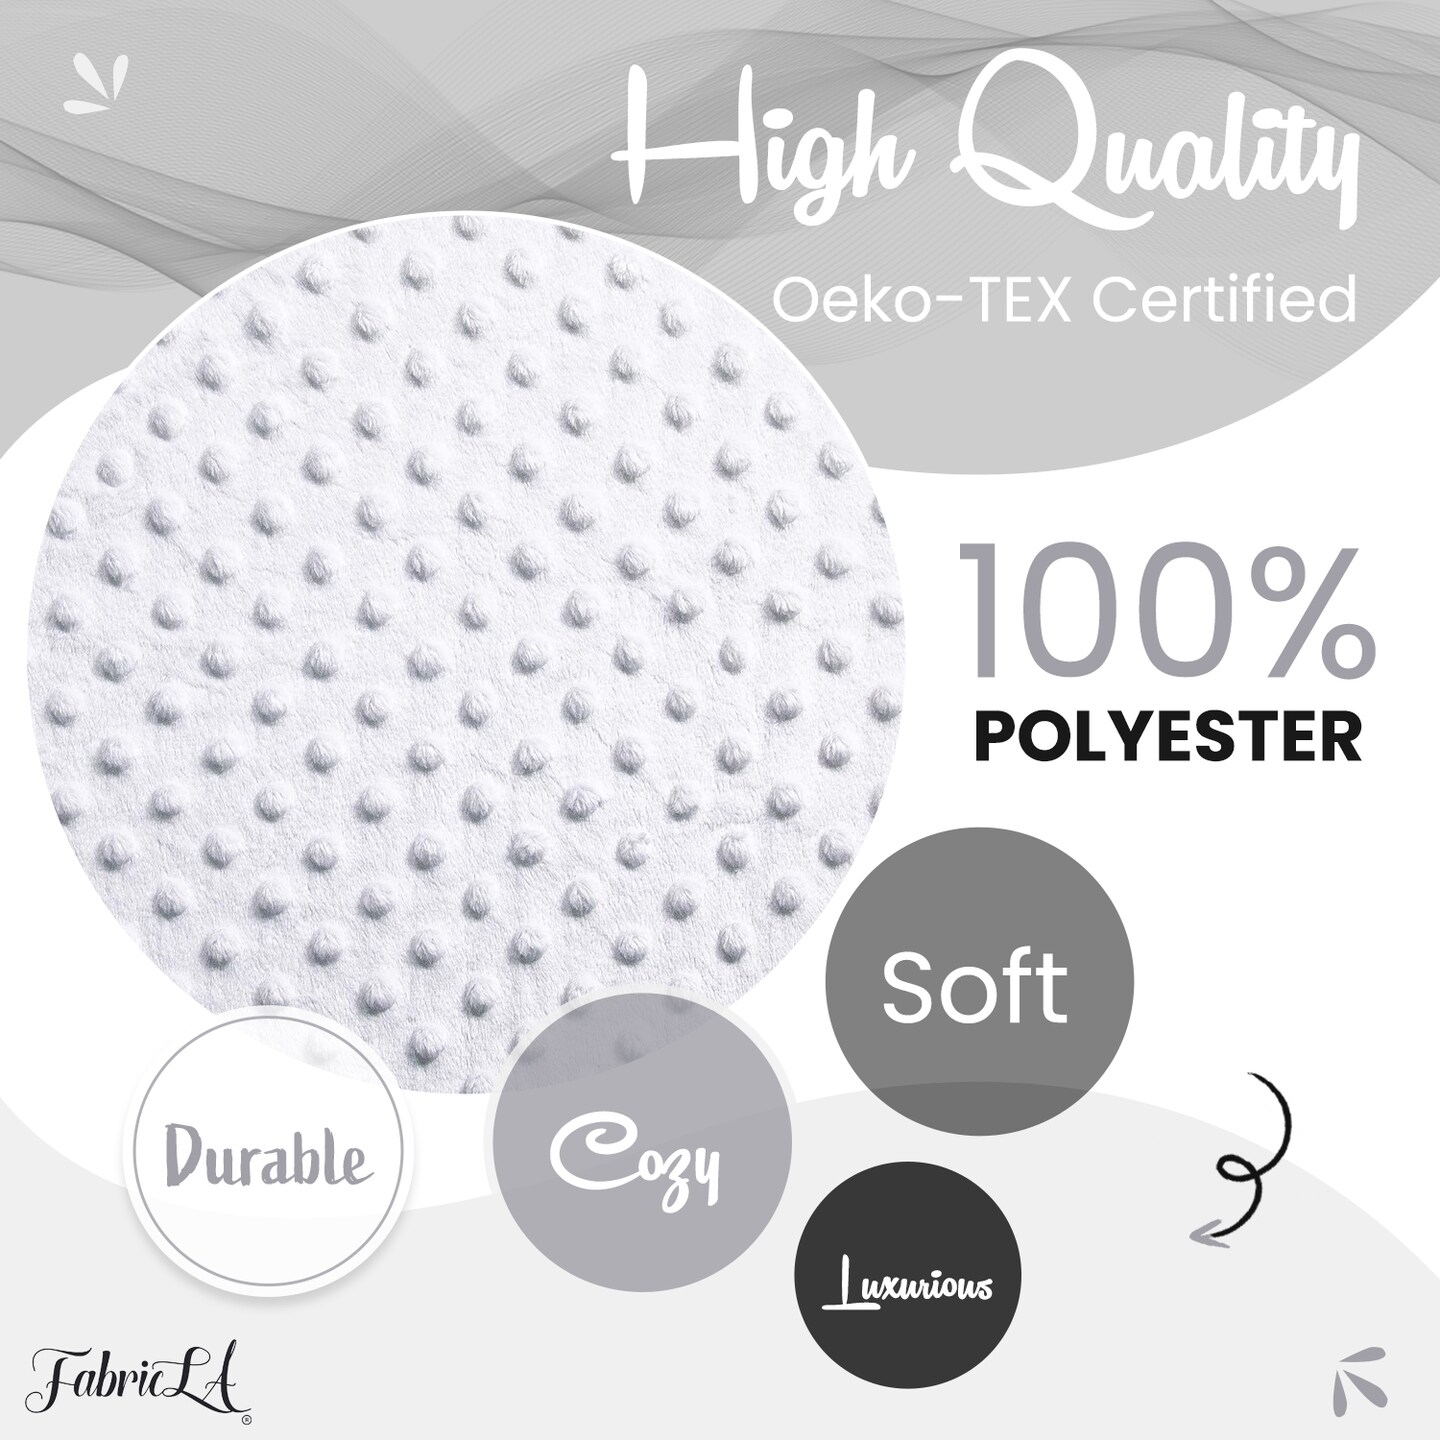 Minky Fabric by The Yard | Oeko-TEX Certified Plush Fabric | Soft Minky Dimple Dot Cuddle Fabric | 60" inches Wide | Baby Blanket, Apparel, Throws